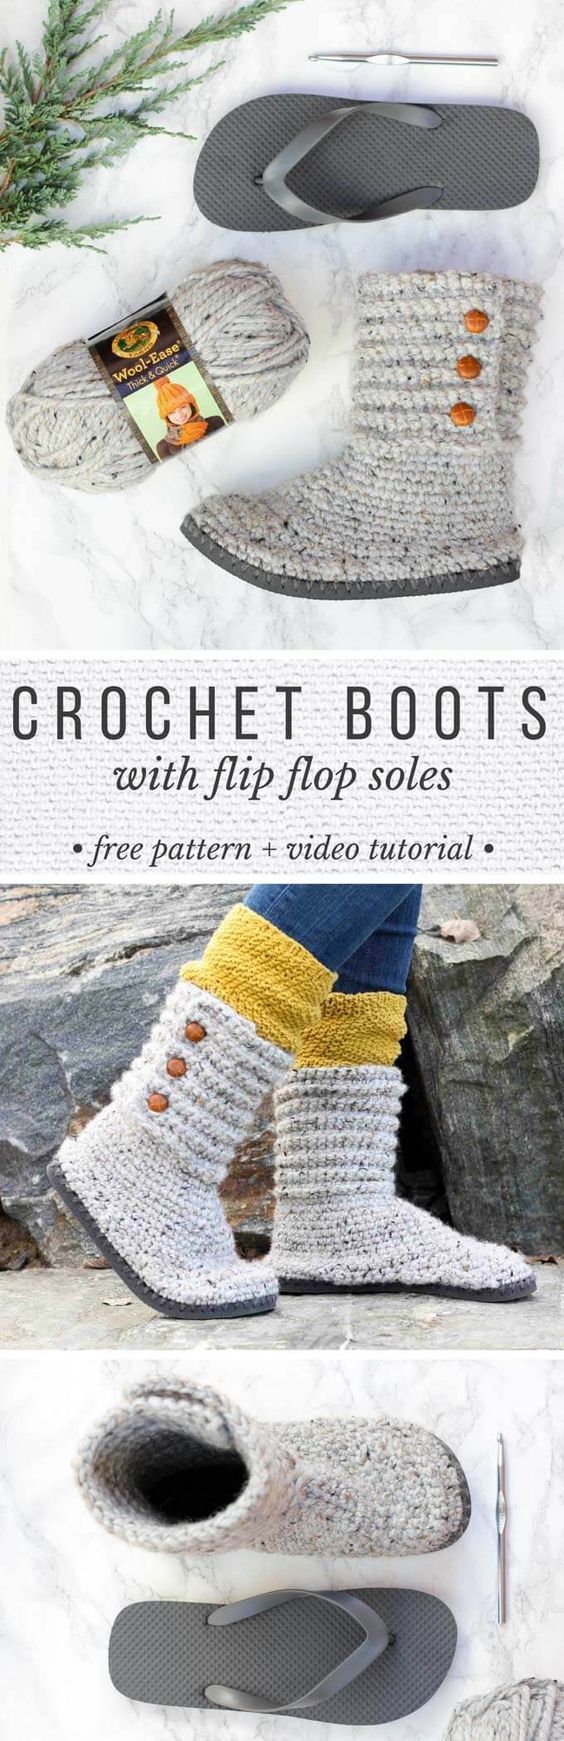 How-to-Crochet-Boots-with-Flip-Flops-Free-Pattern.jpg